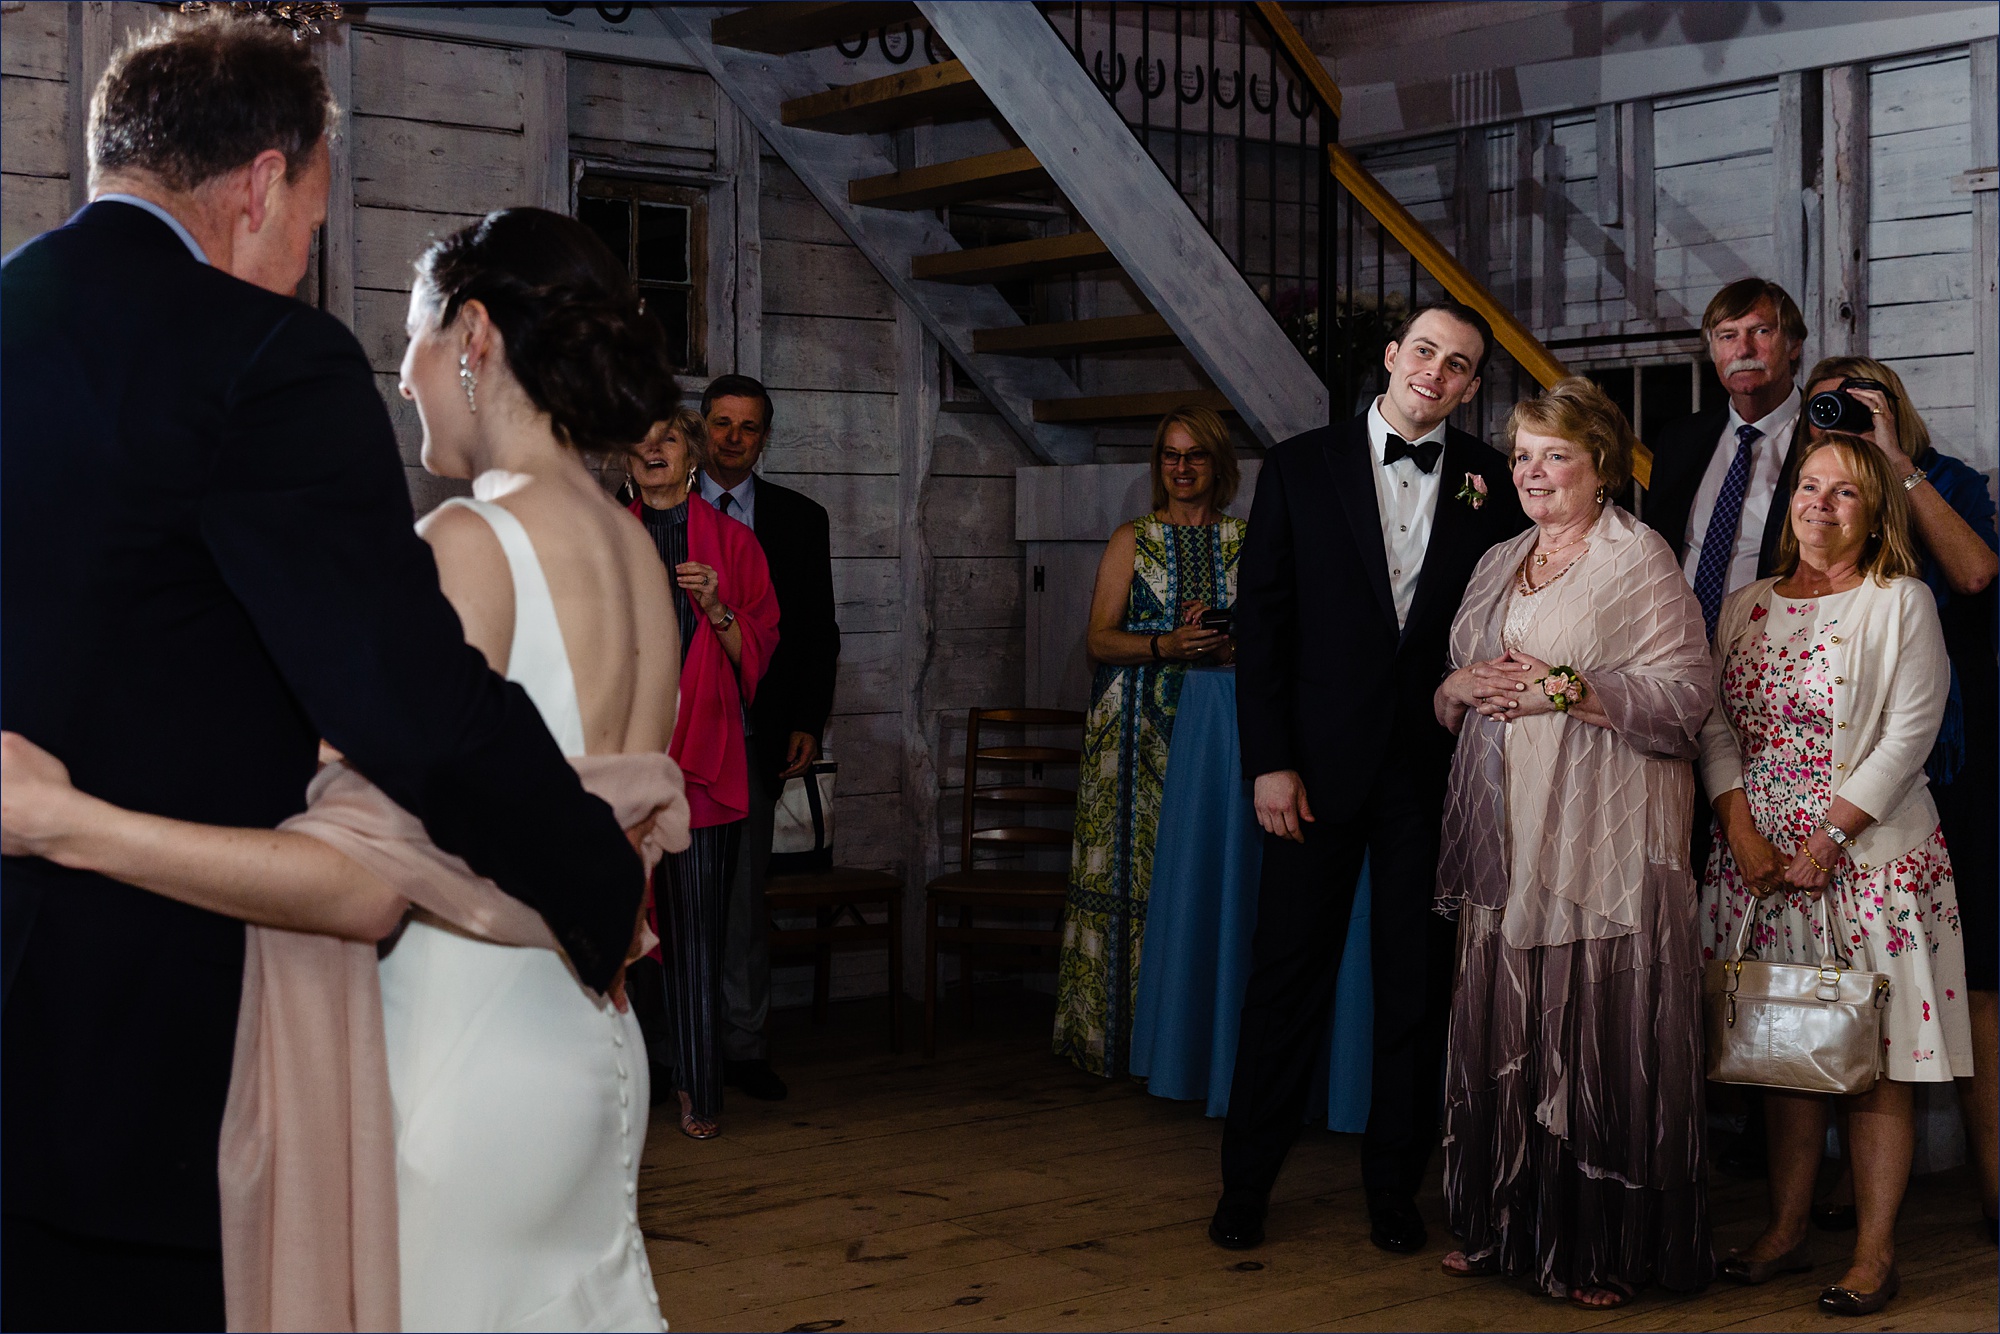 The groom and his mother watch the bride and her father dance at the Maine wedding reception in the Hardy Farm barn